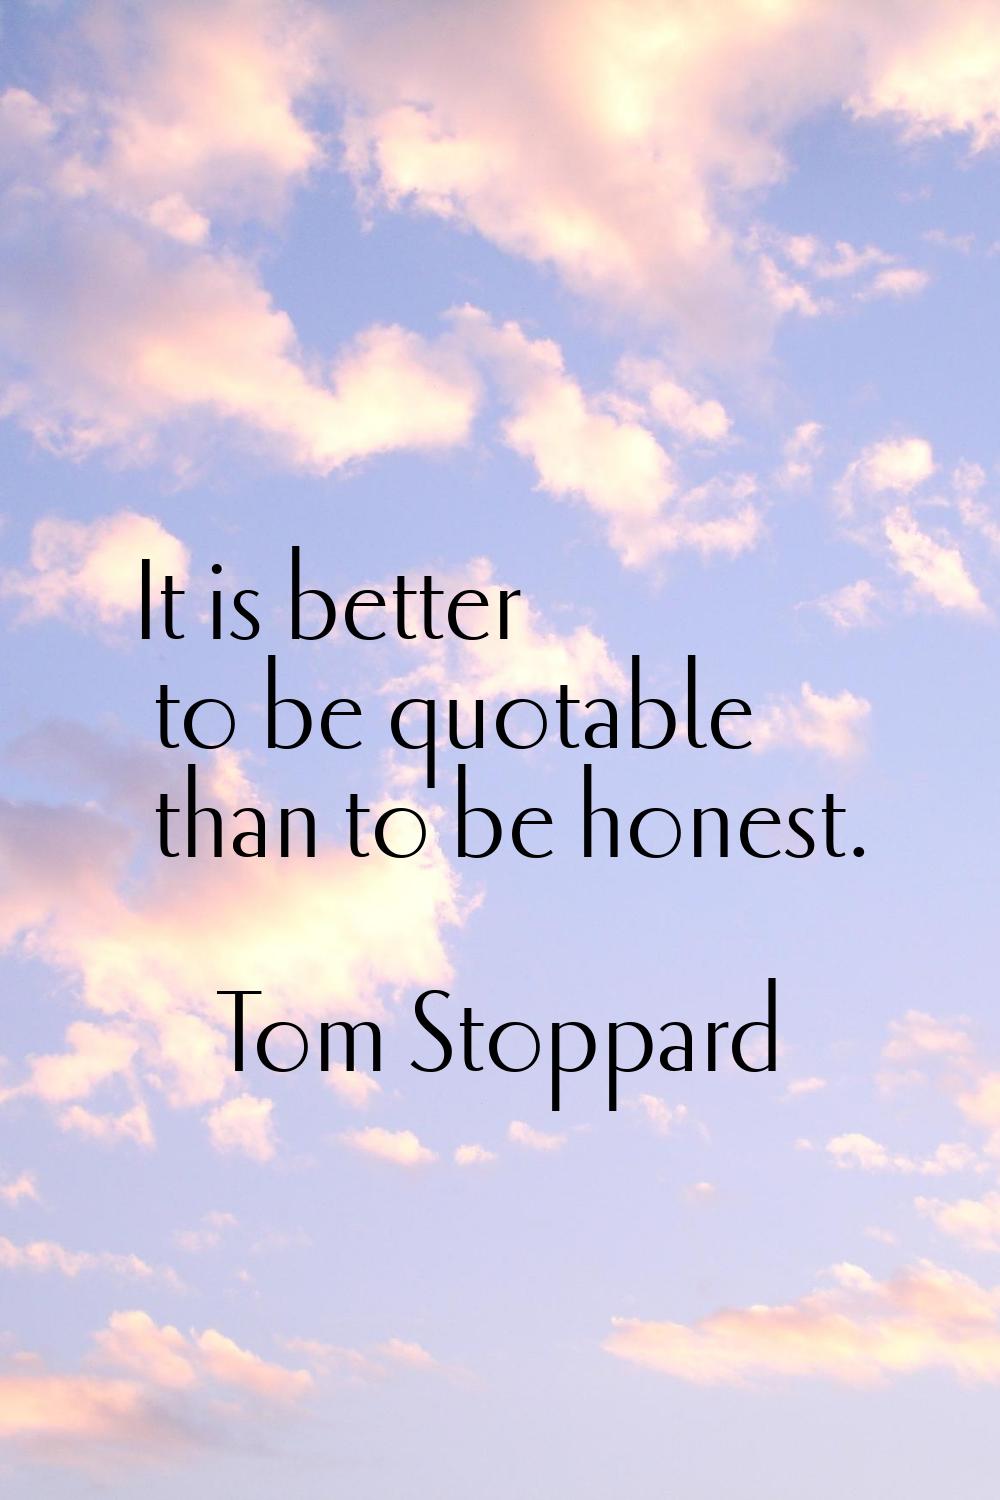 It is better to be quotable than to be honest.